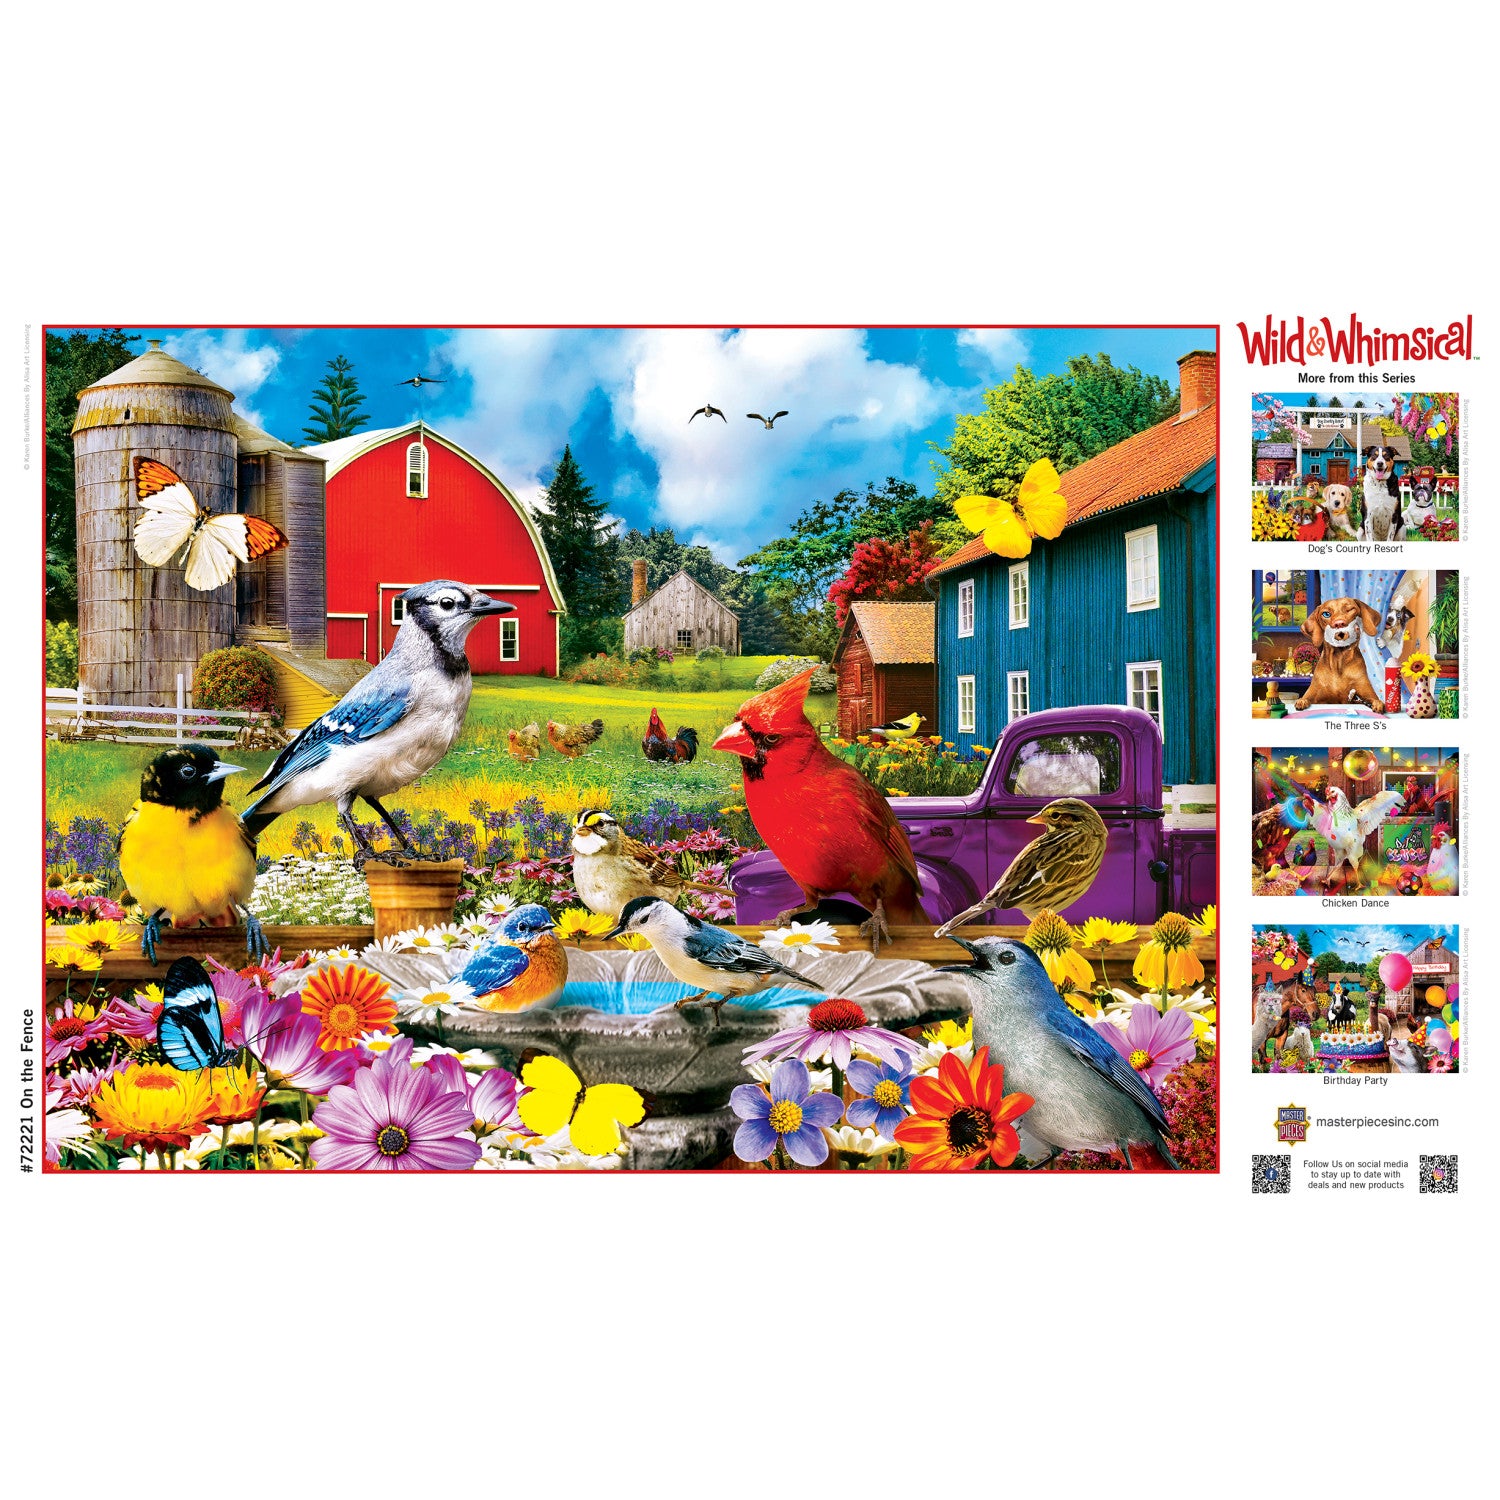 Wild & Whimsical - On The Fence 1000 Piece Puzzle